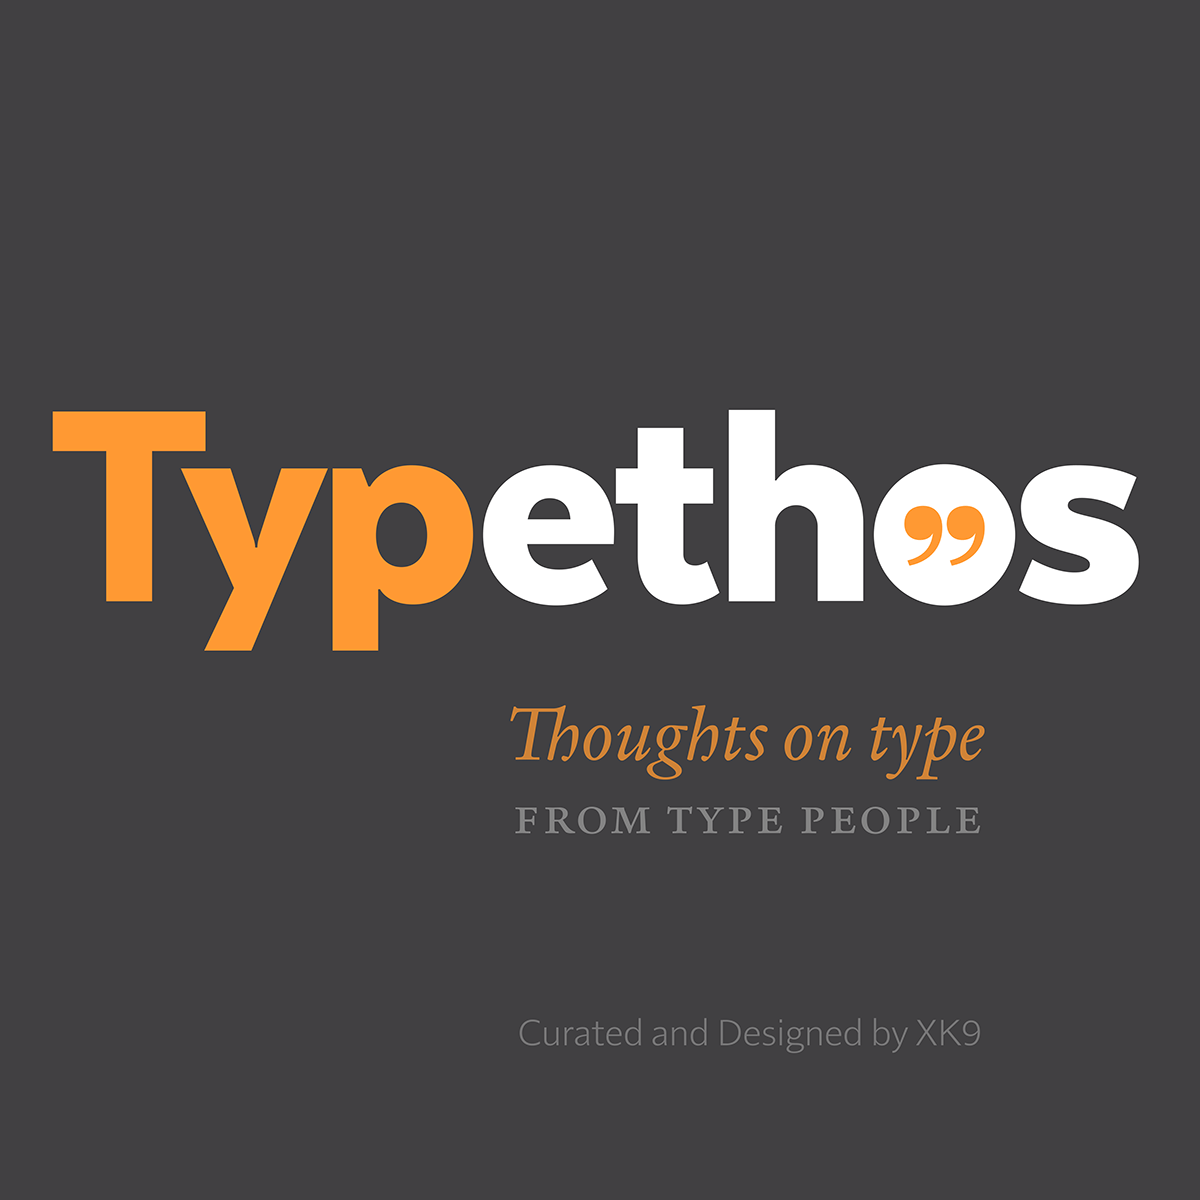 Typethos Thoughts on Type from Type People by Bill Dawson